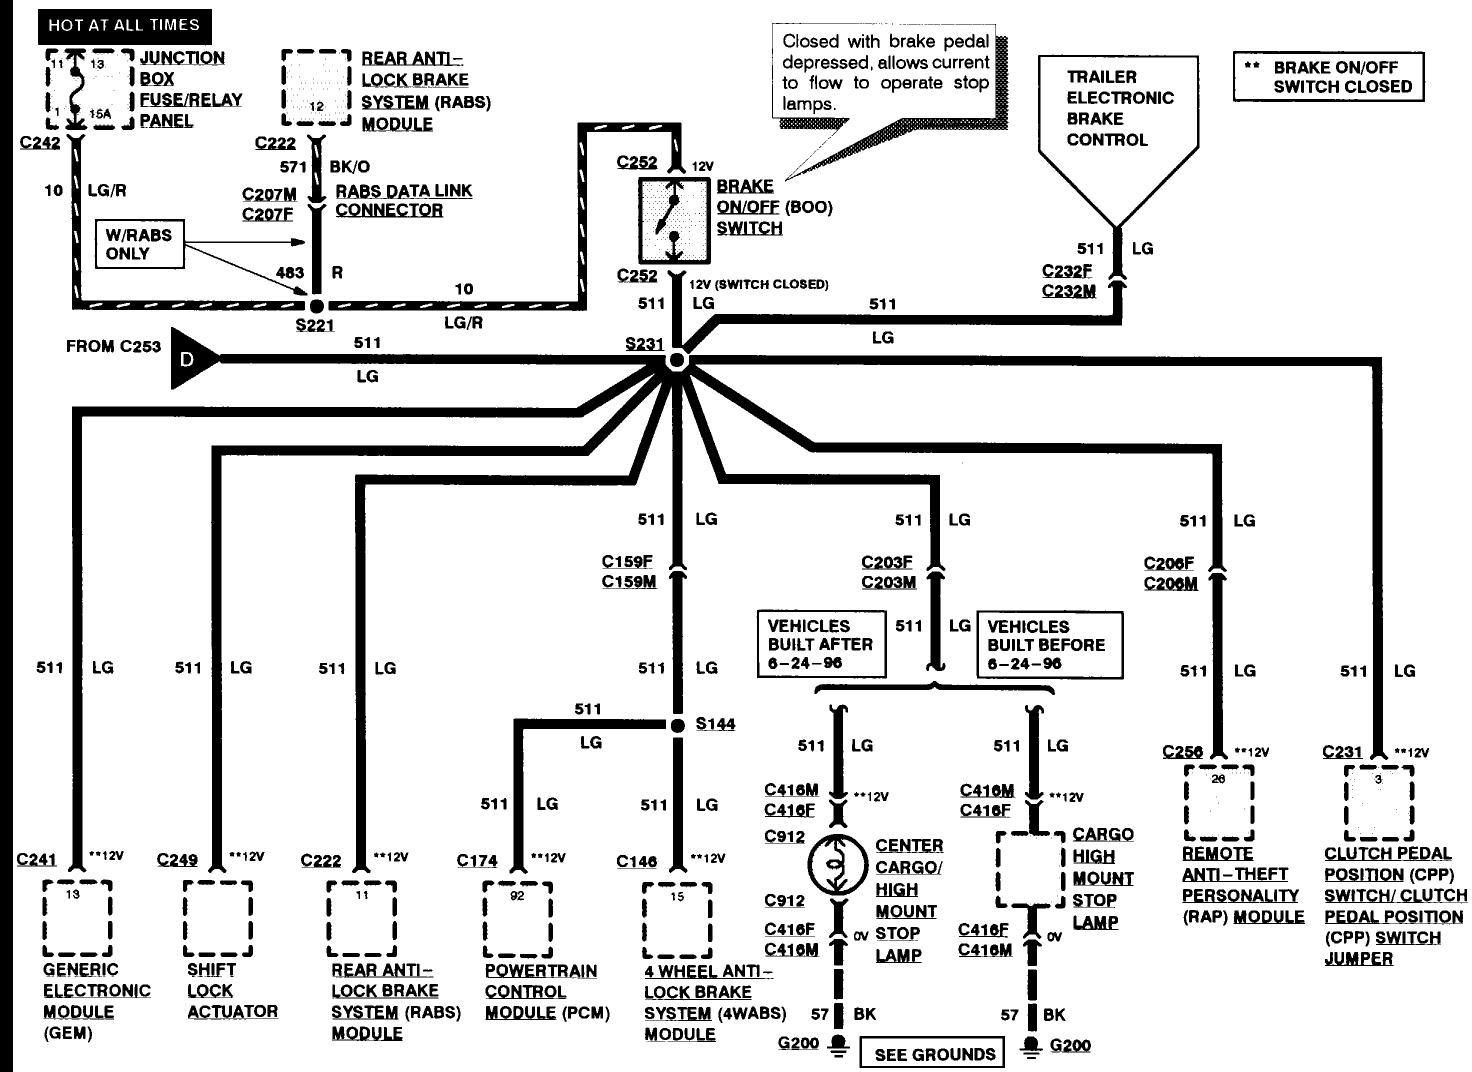 Looking for a wiring diagram for a 97 F250 - Ford Forums - Mustang Forum, Ford Trucks, Ford 1997 Ford F150 Brake Light Switch Location